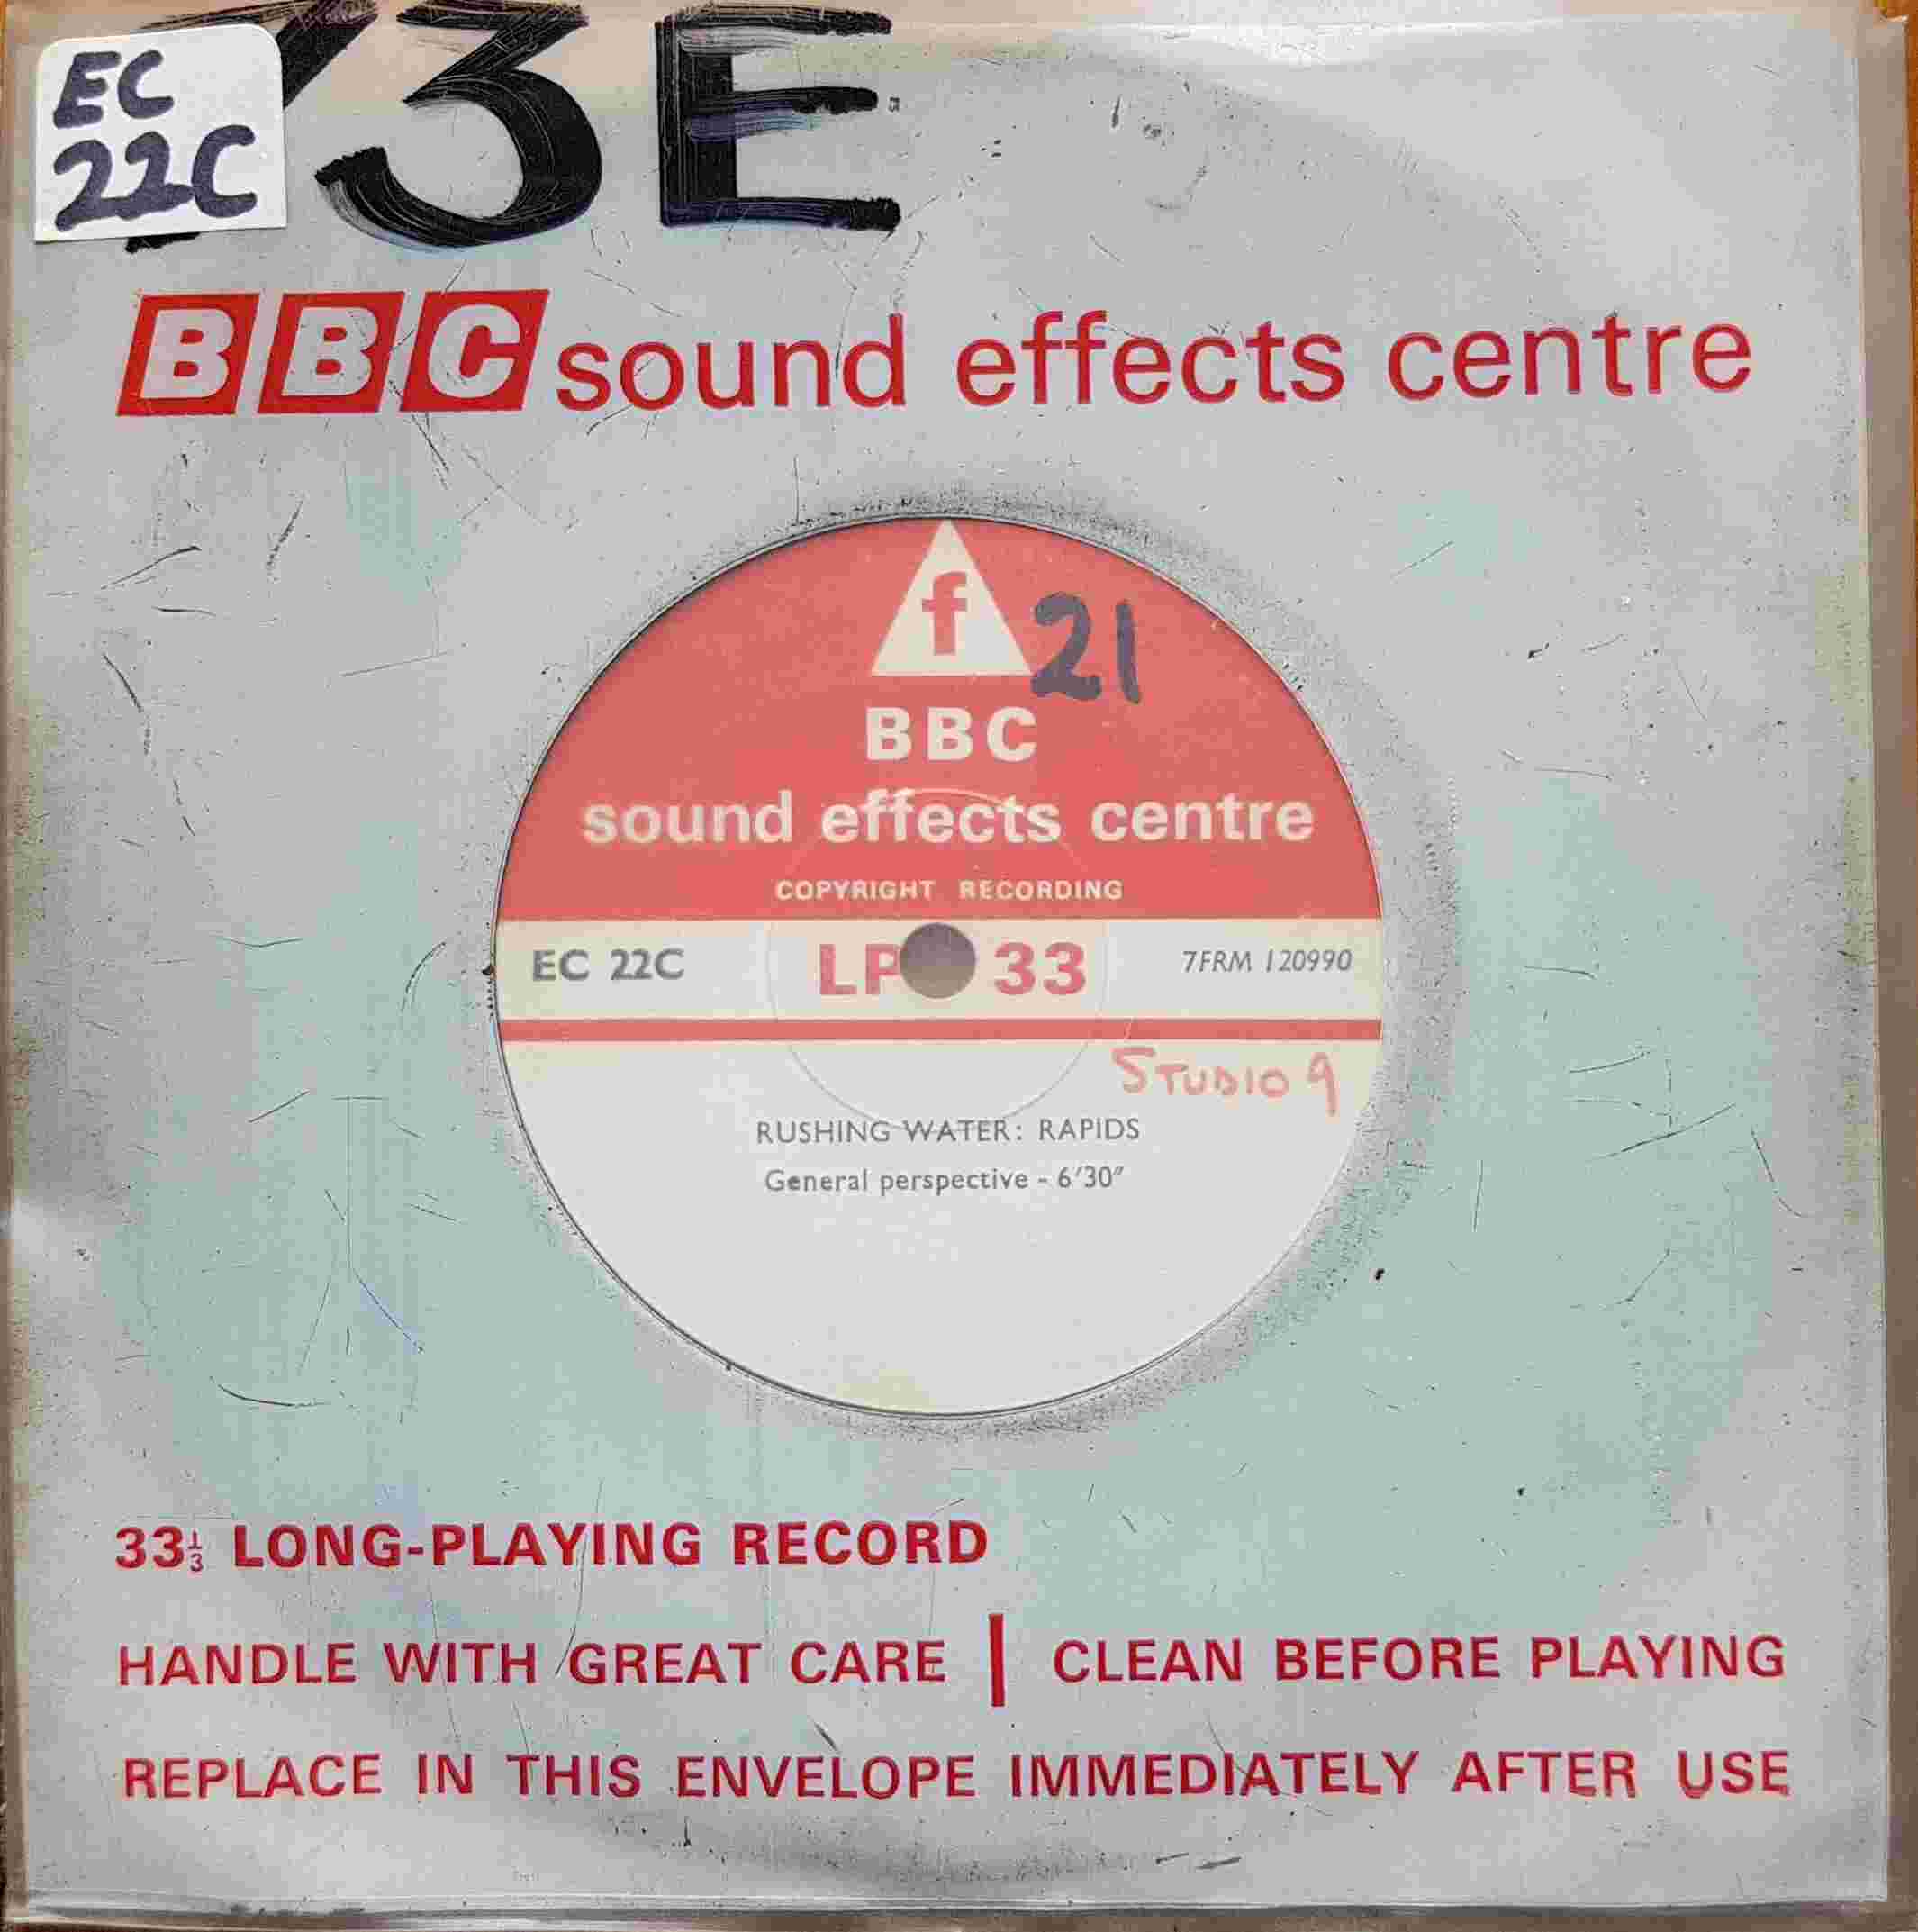 Picture of EC 22C Rushing water: Rapids by artist Not registered from the BBC singles - Records and Tapes library